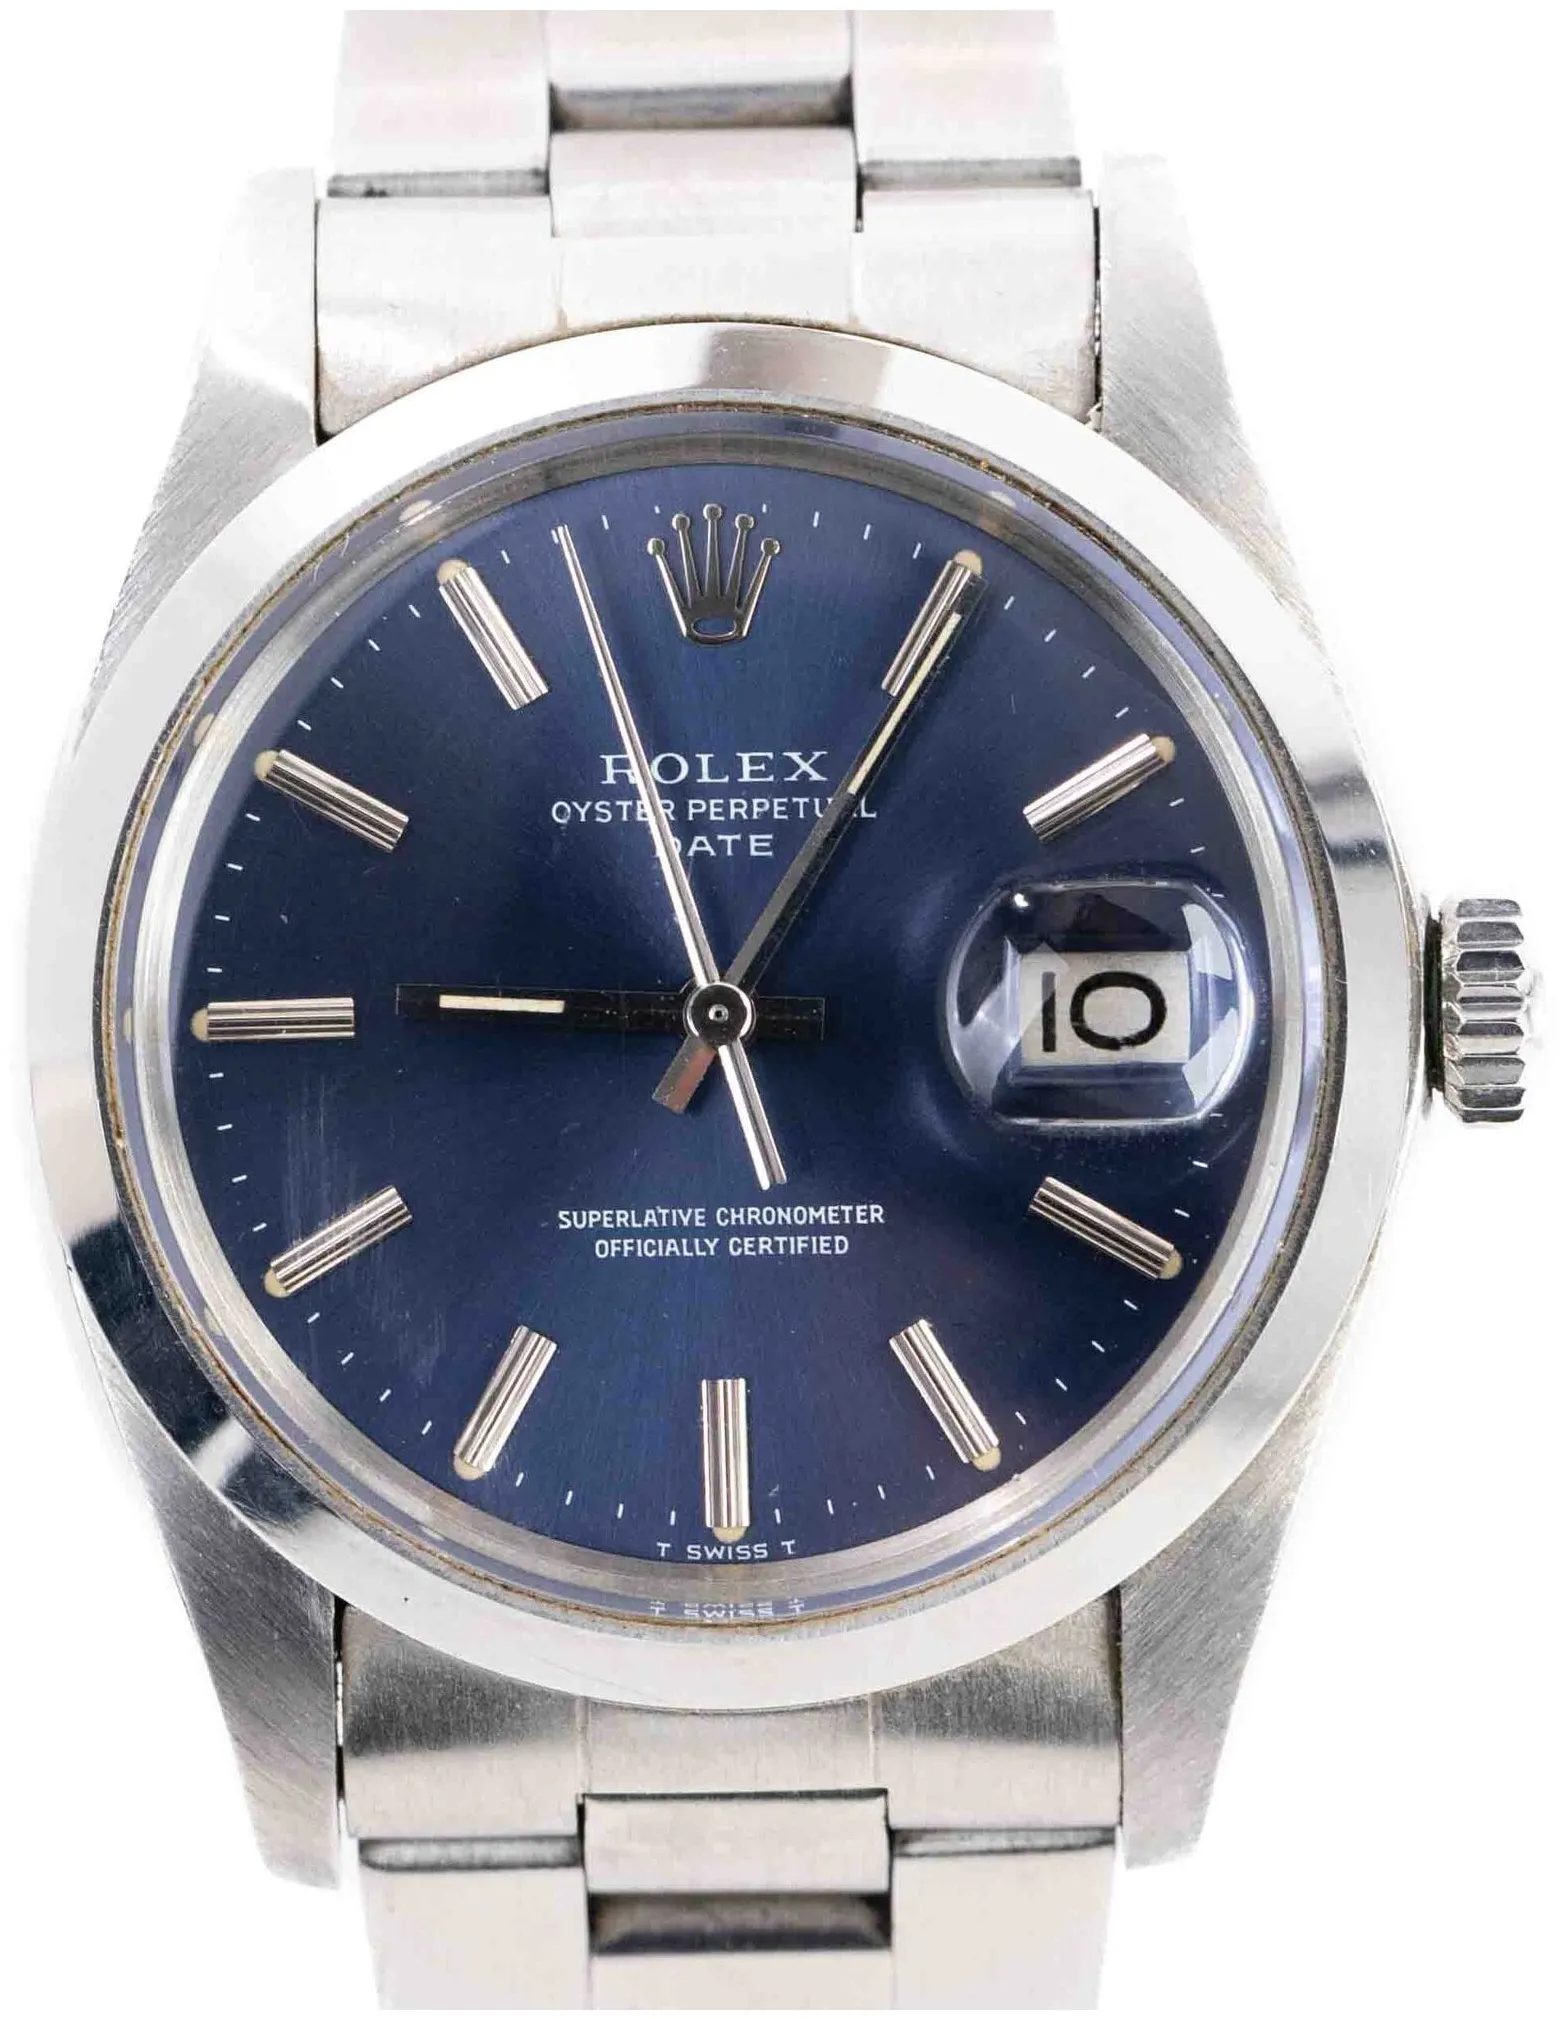 Rolex Oyster Perpetual Date 1500 34mm Stainless steel Blue 4